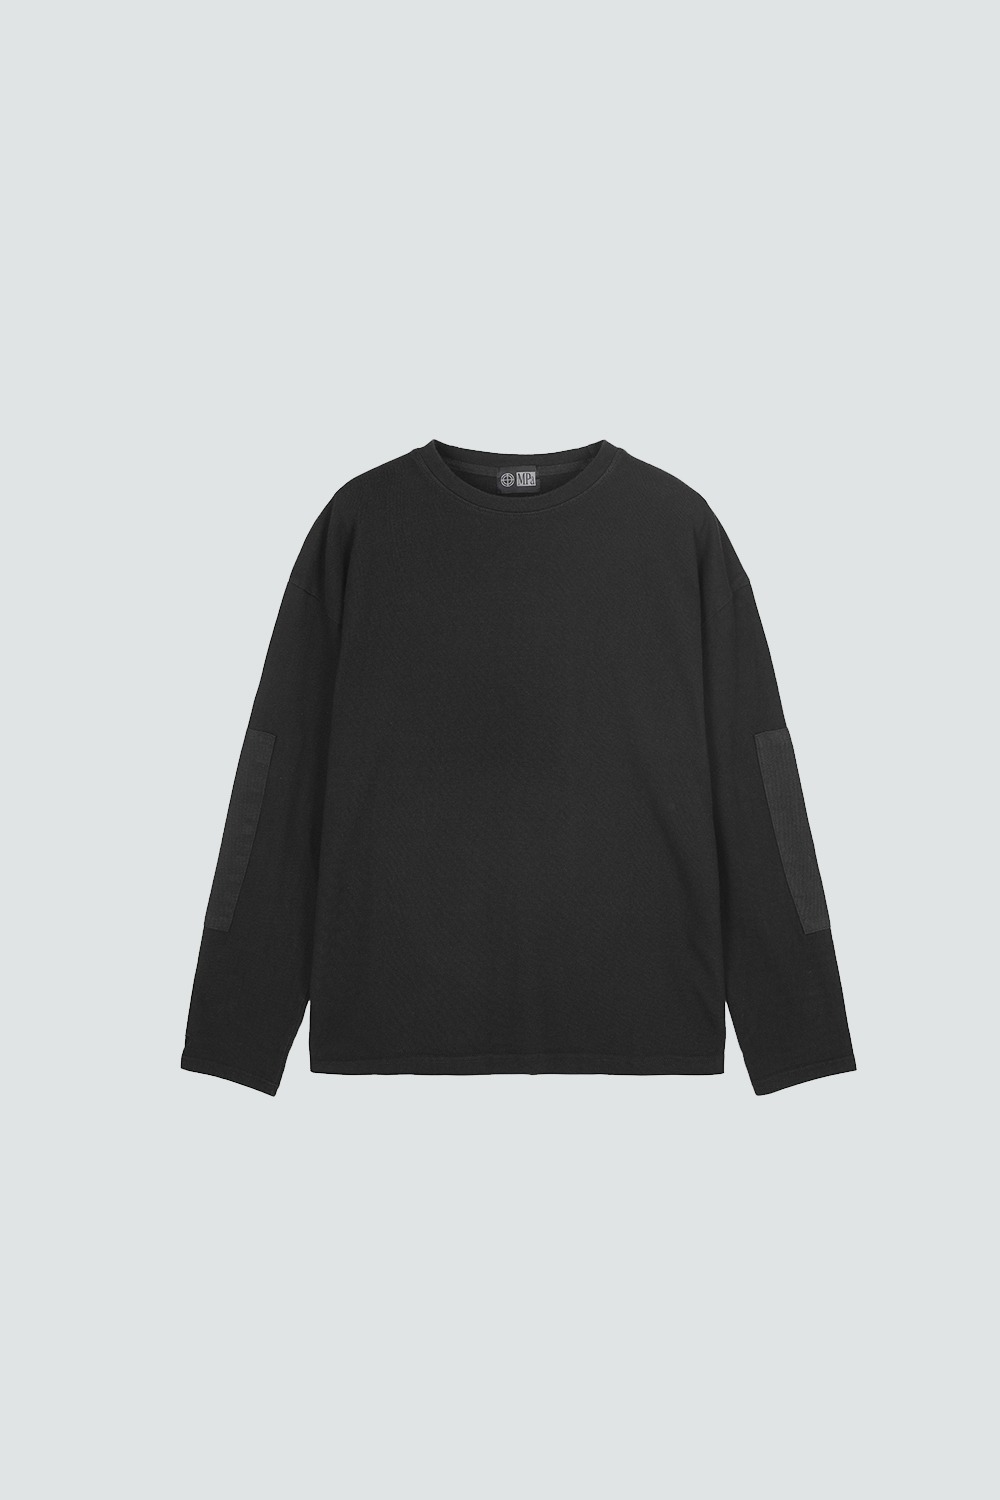 MPa PATCHED SLEEVE (BLACK)